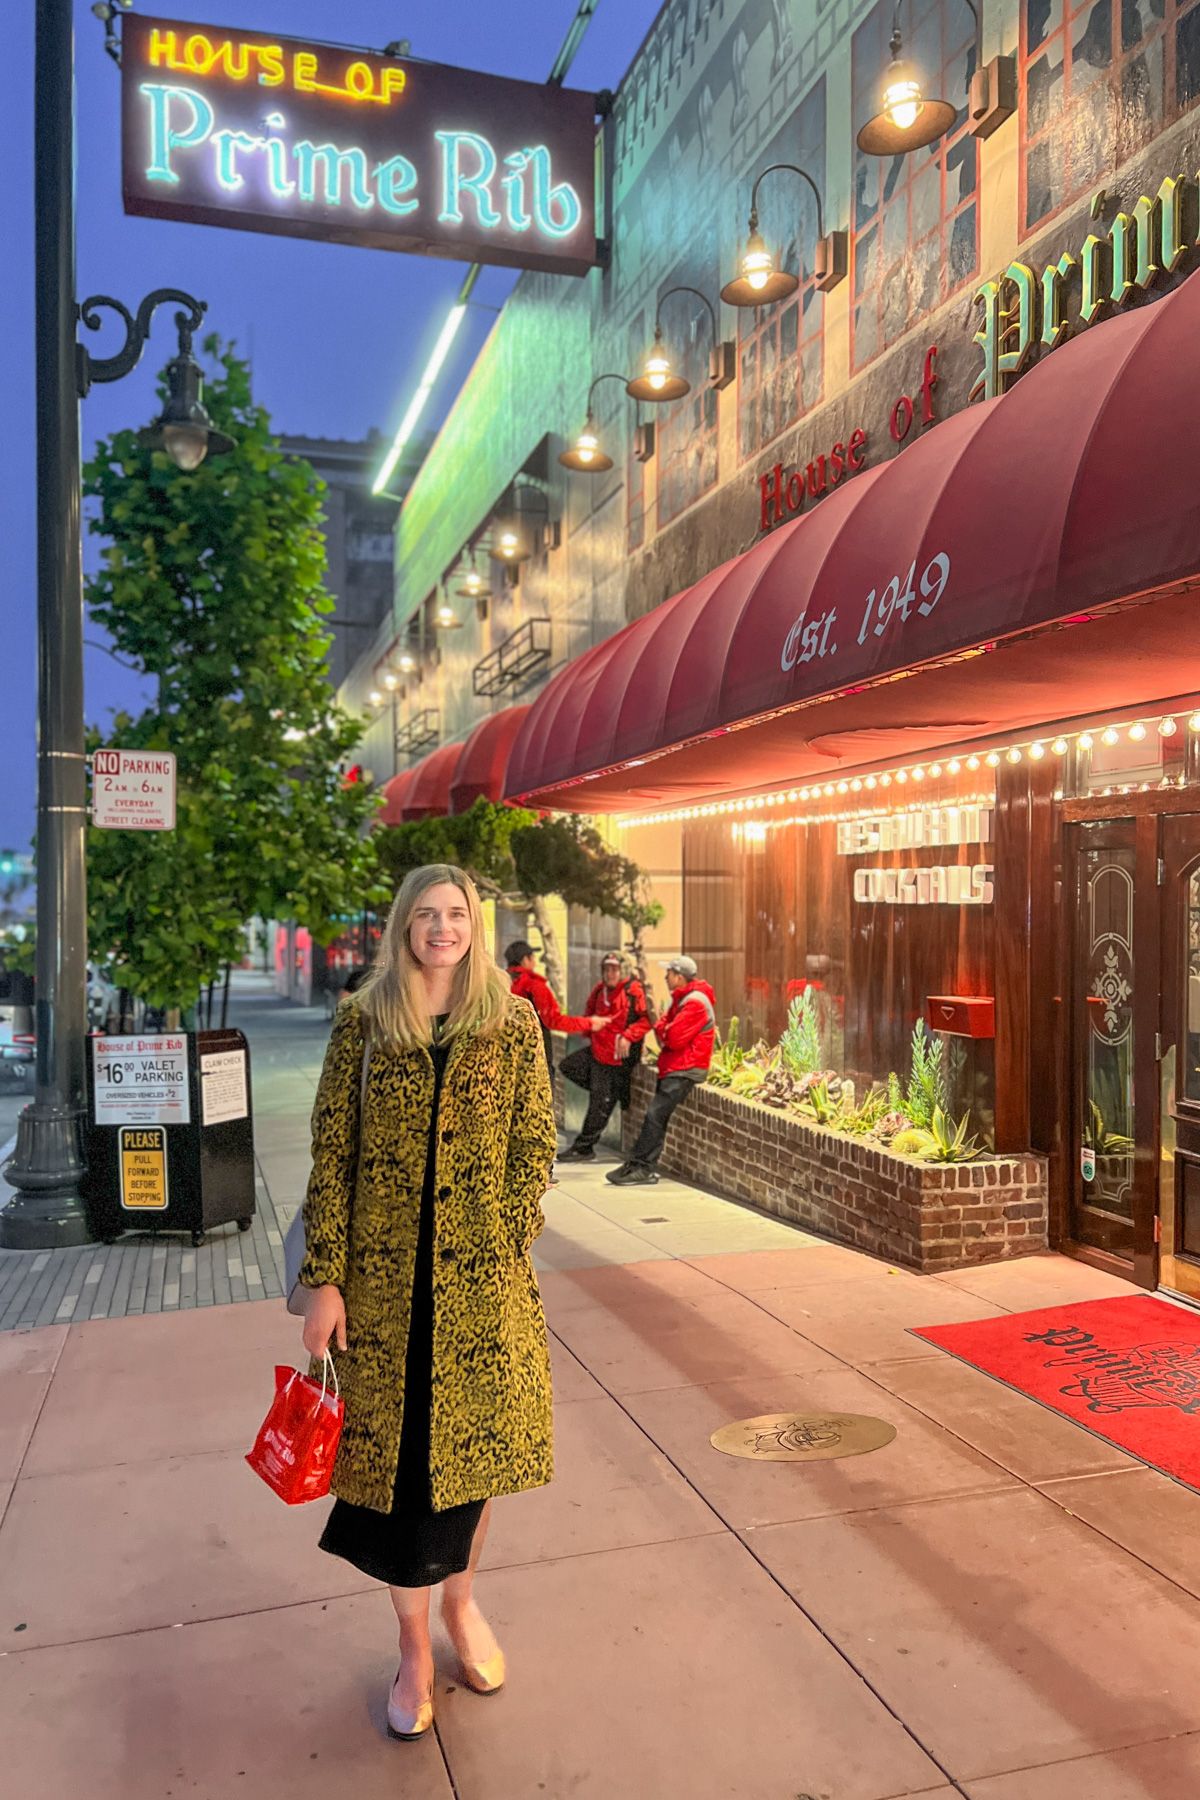 A young, light-haired woman wears a yellow leopard-print wool coat and holds a red purse and stands facing the camera in front of House of Prime Rib on a city sidewalk at dusk.